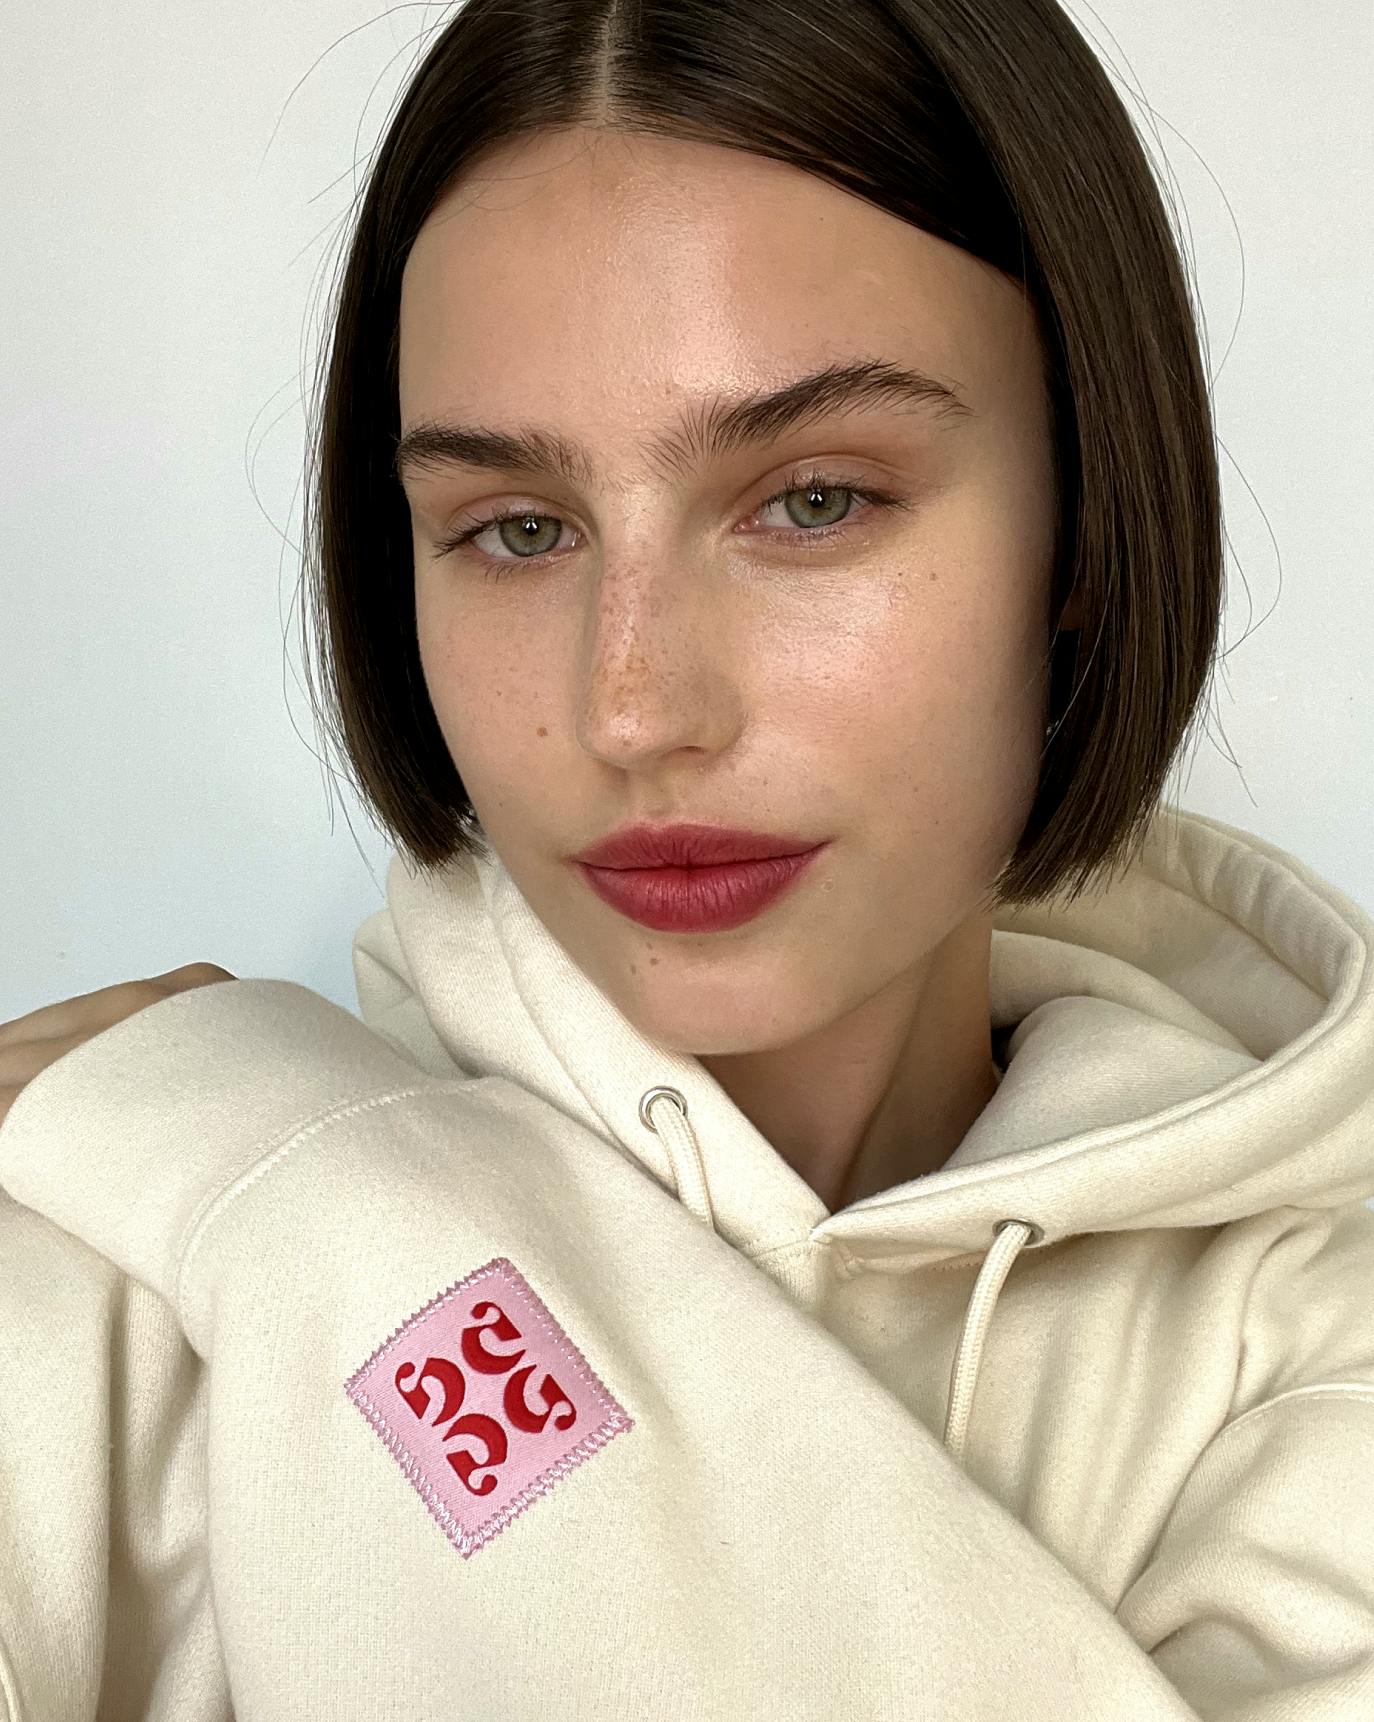 Chloe wears the limited-edition Embroidered Cream Hoodie.